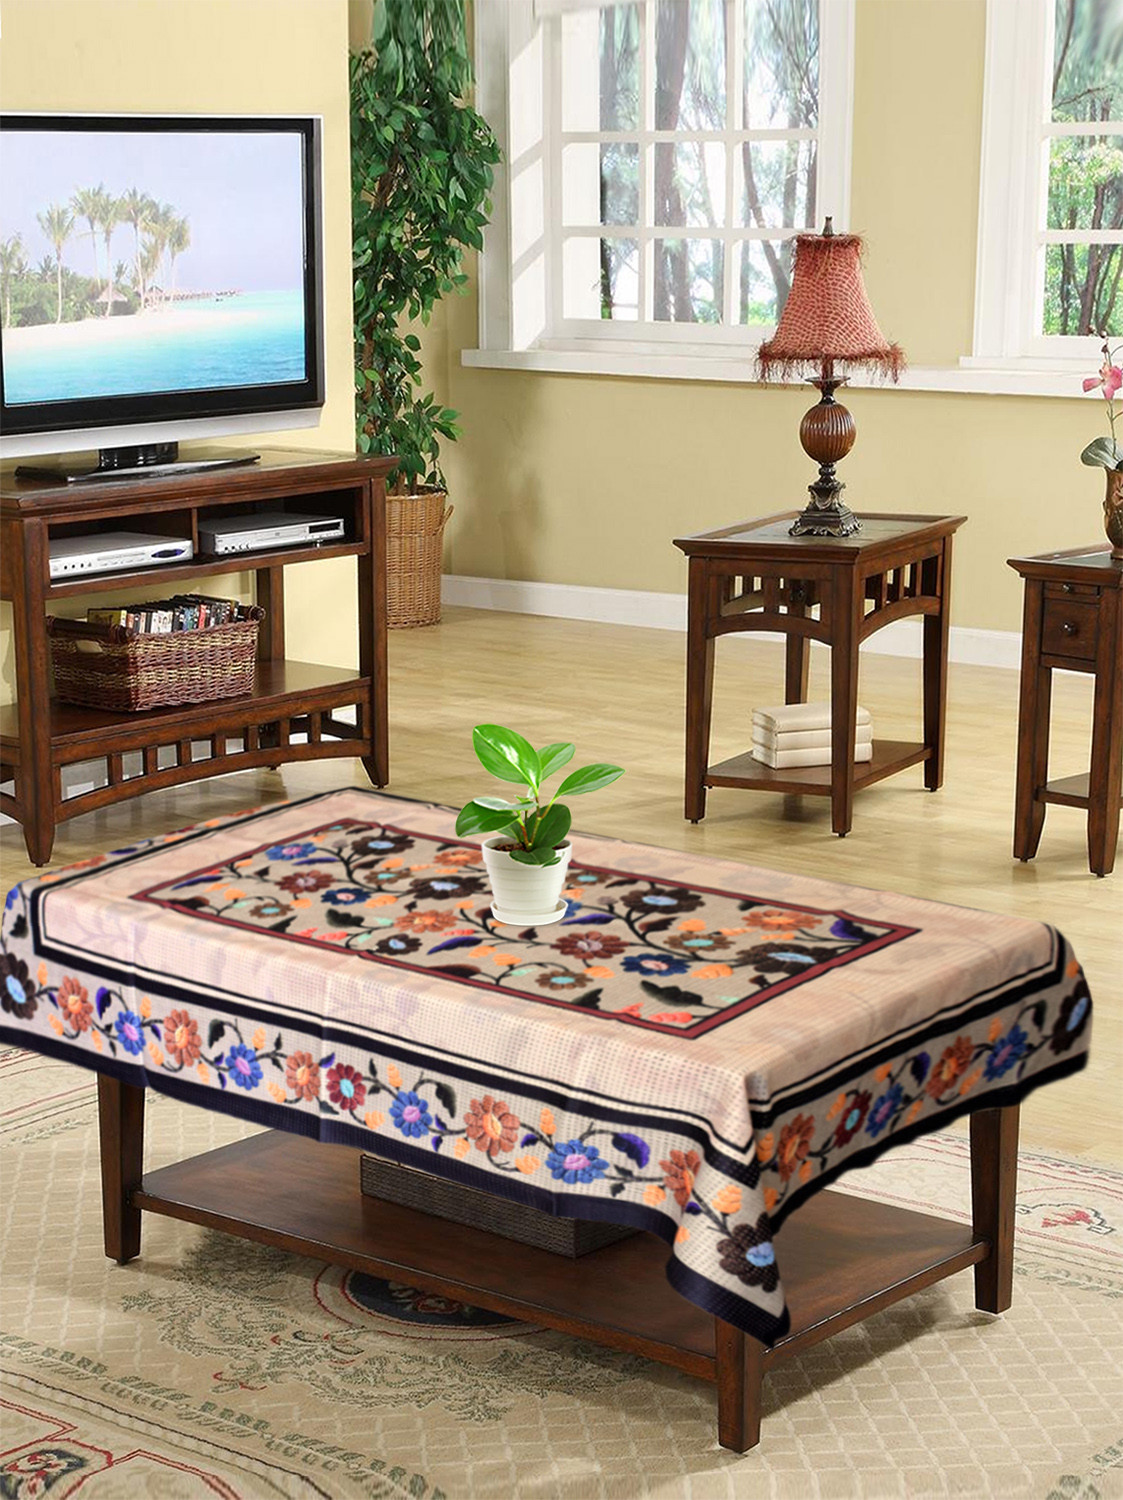 Kuber Industries Flower Printed Cotton 4 Seater Center Table Cover- 40